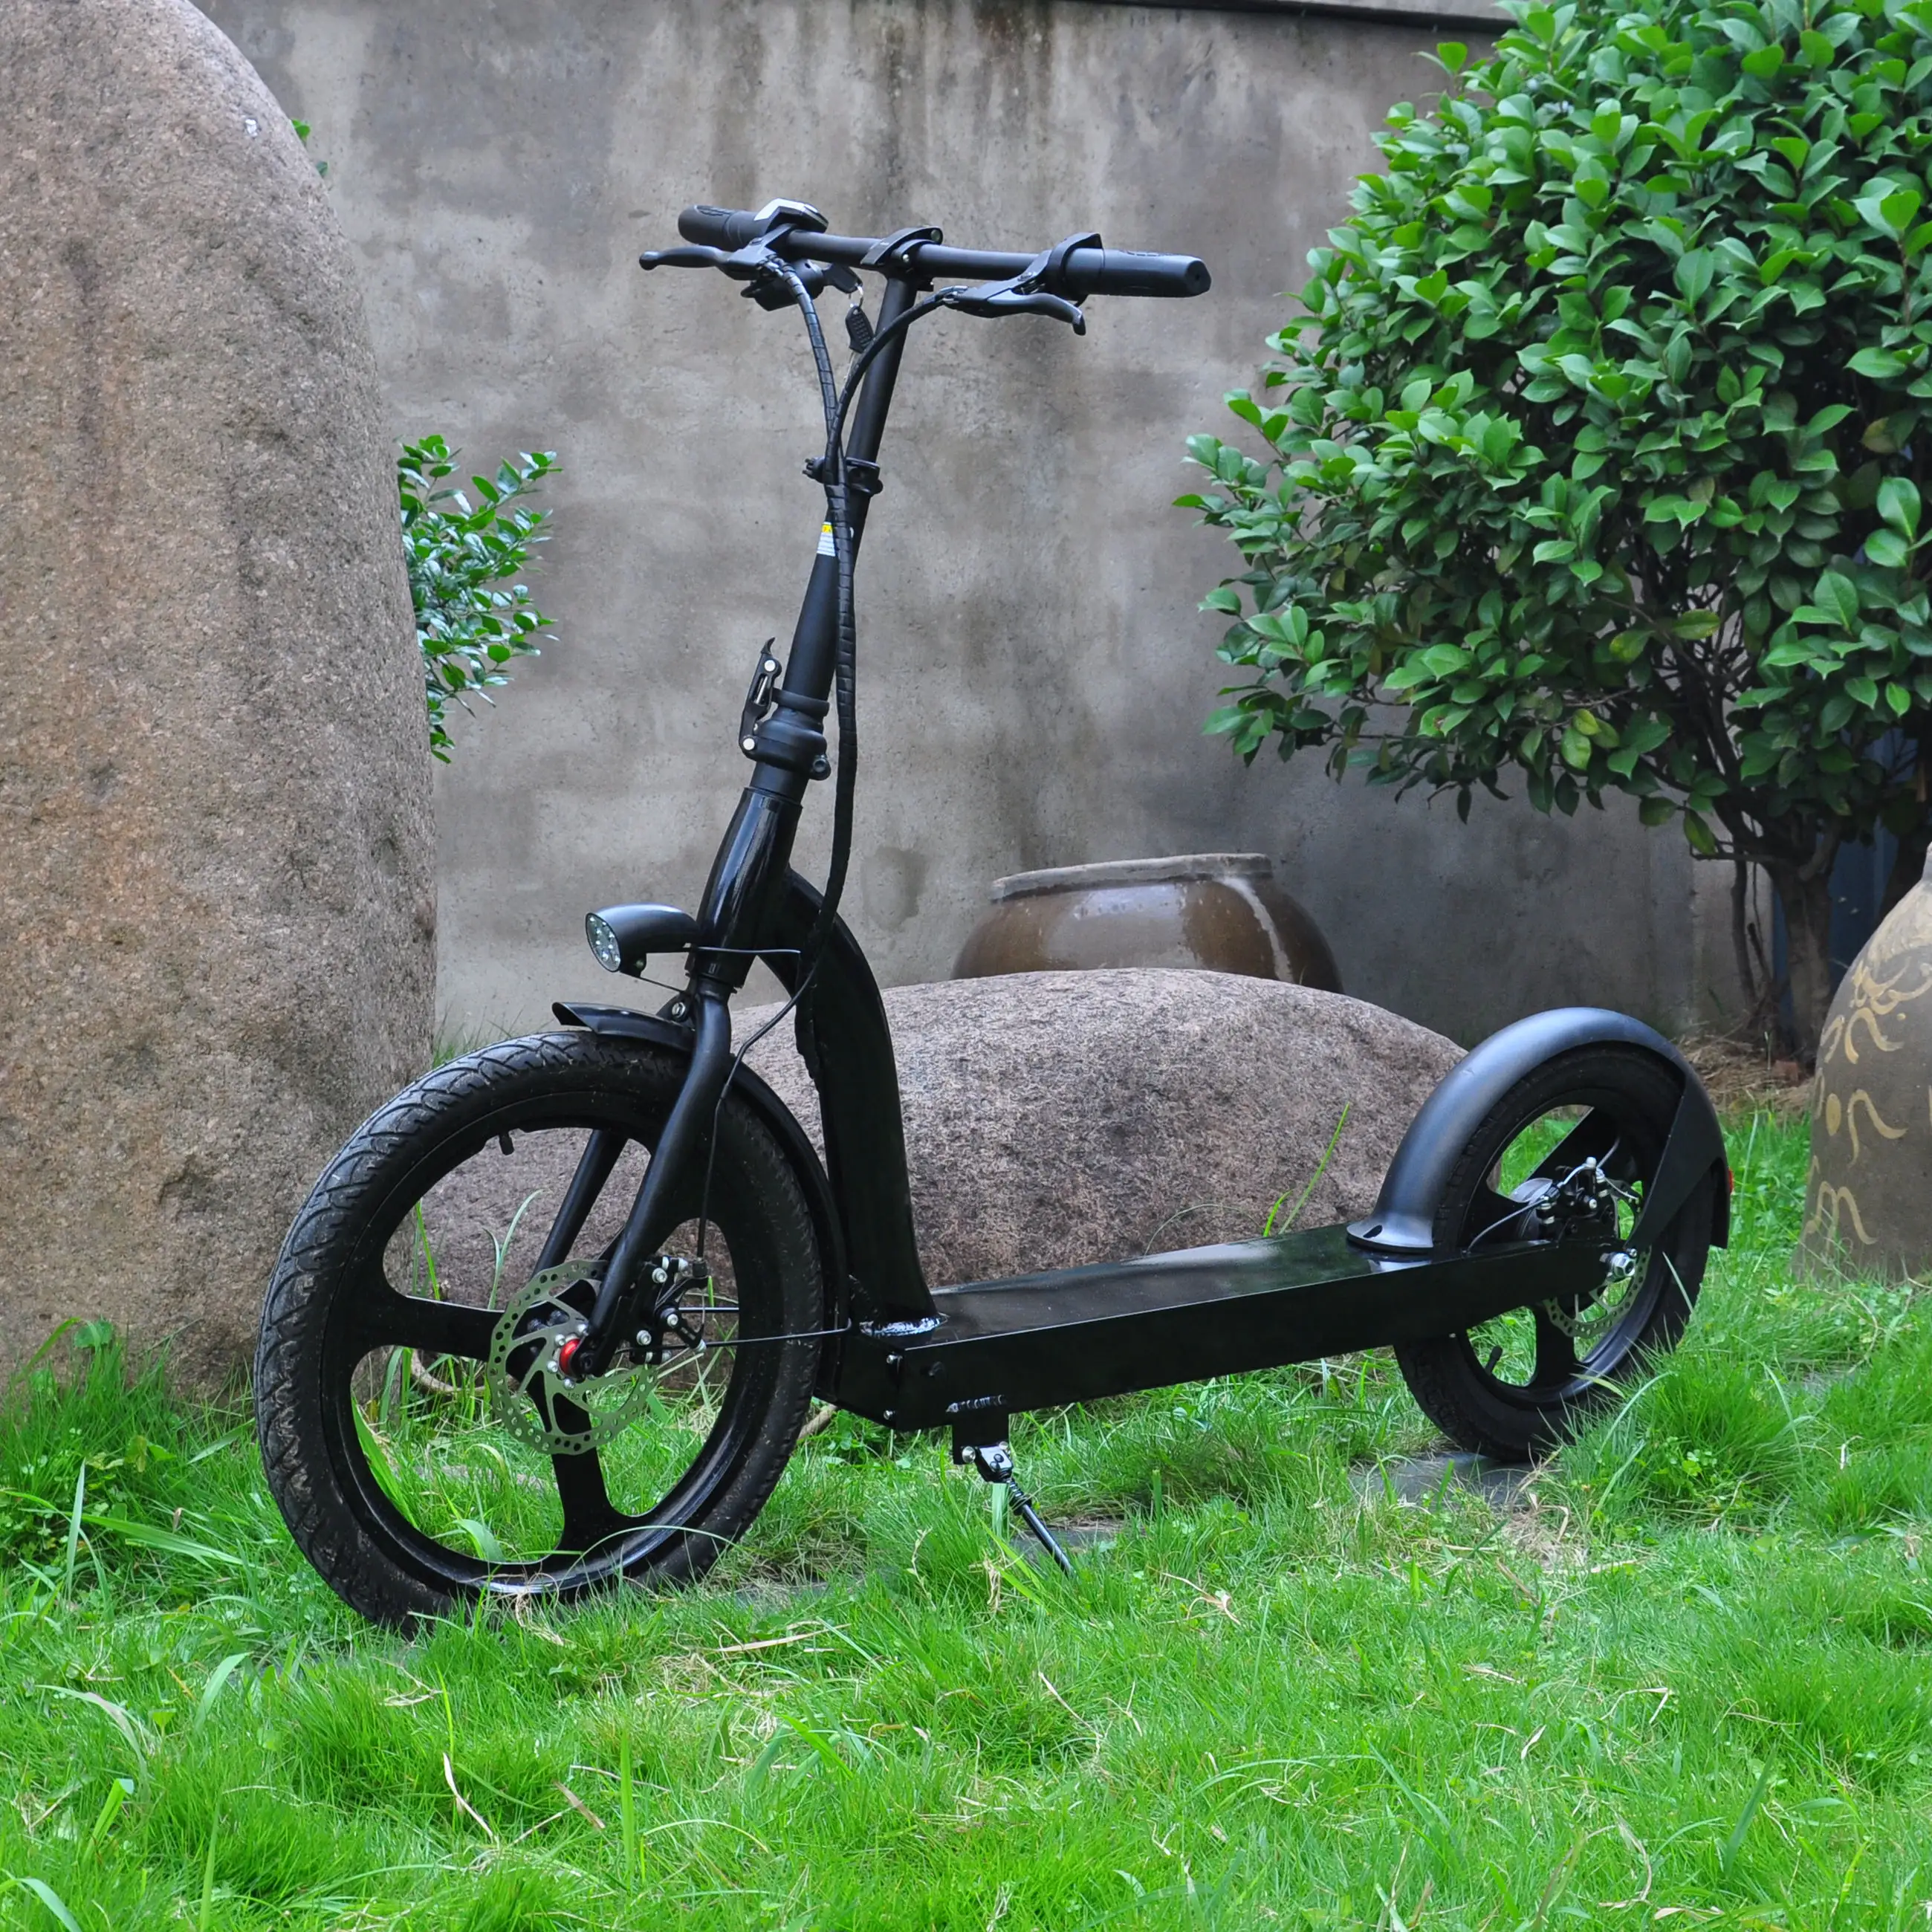 Electric 2 Wheel Scooters Wholesale New Kick Sharing 2 Wheels Portable Scooter Off Road Kick Foldable Adult Electric Scooter